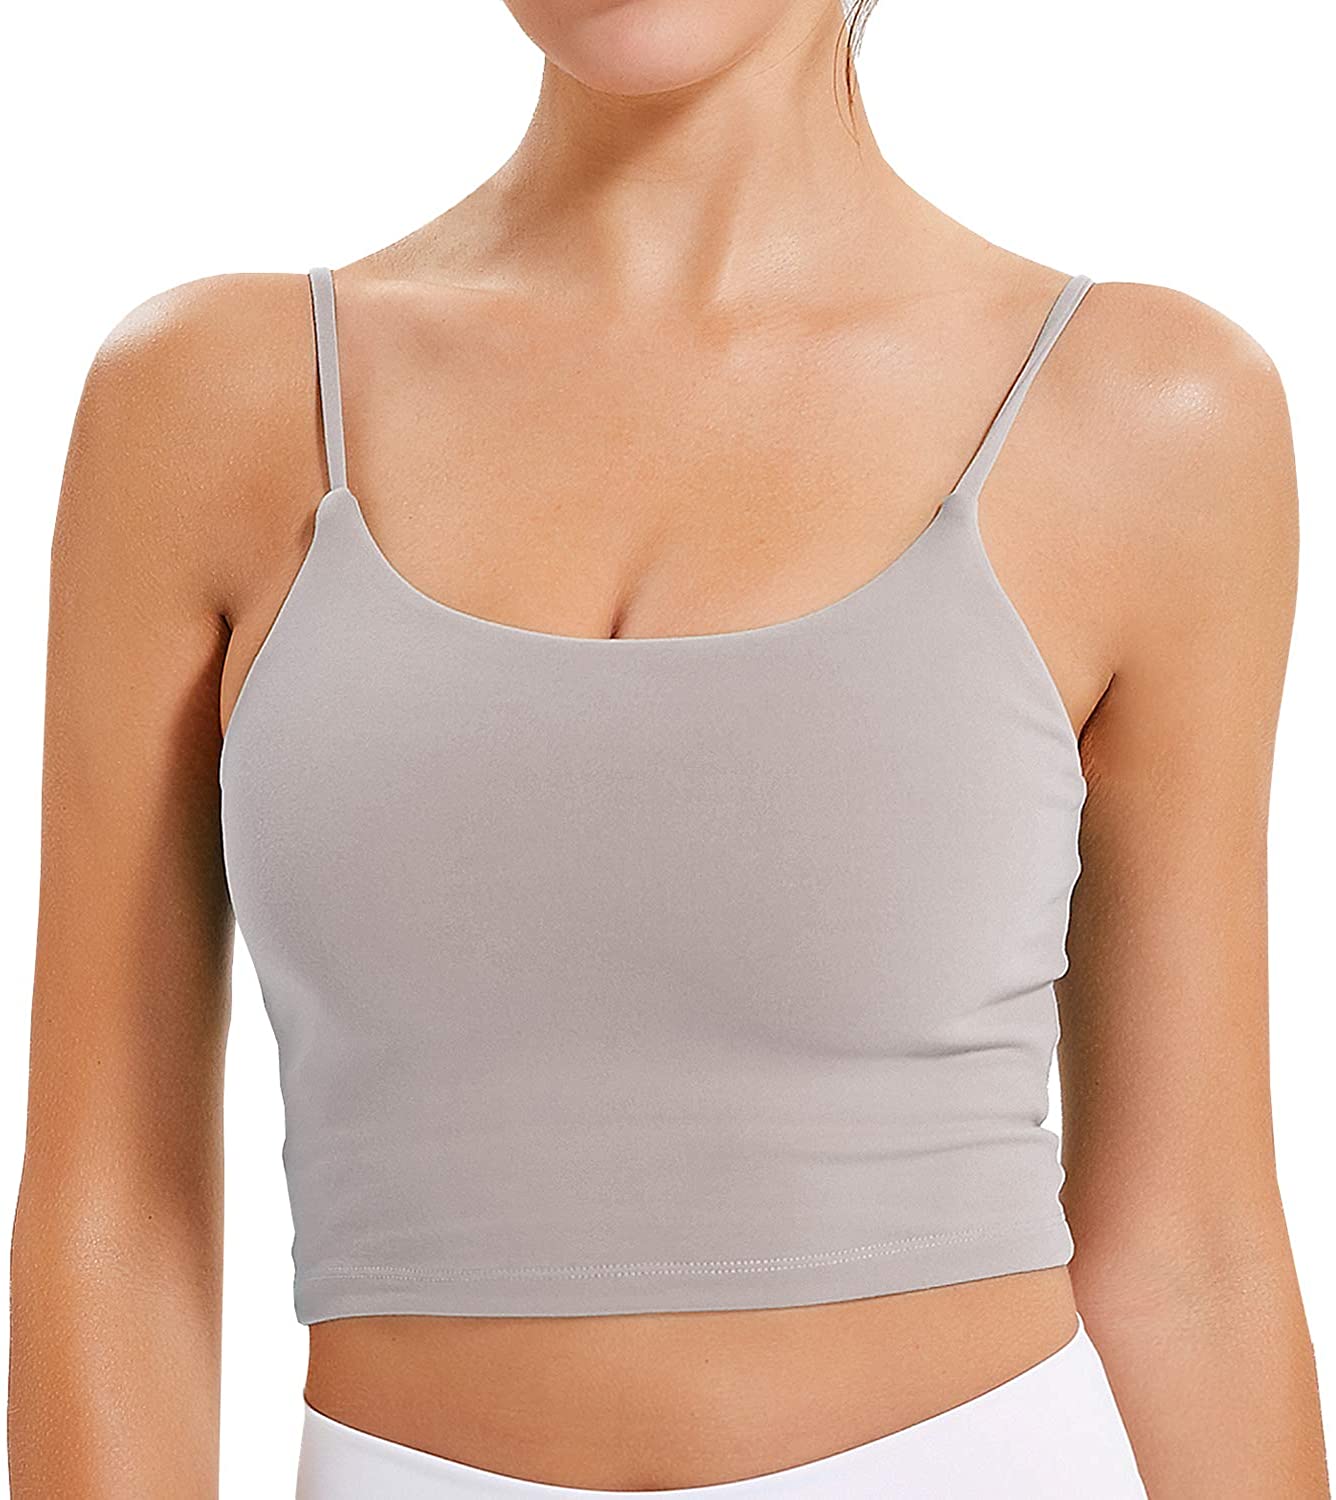 Lavento Women's Longline Sports Bra - Crop Tank Top with Built in Bra  Gray Size 8 - $17 (66% Off Retail) - From Megan